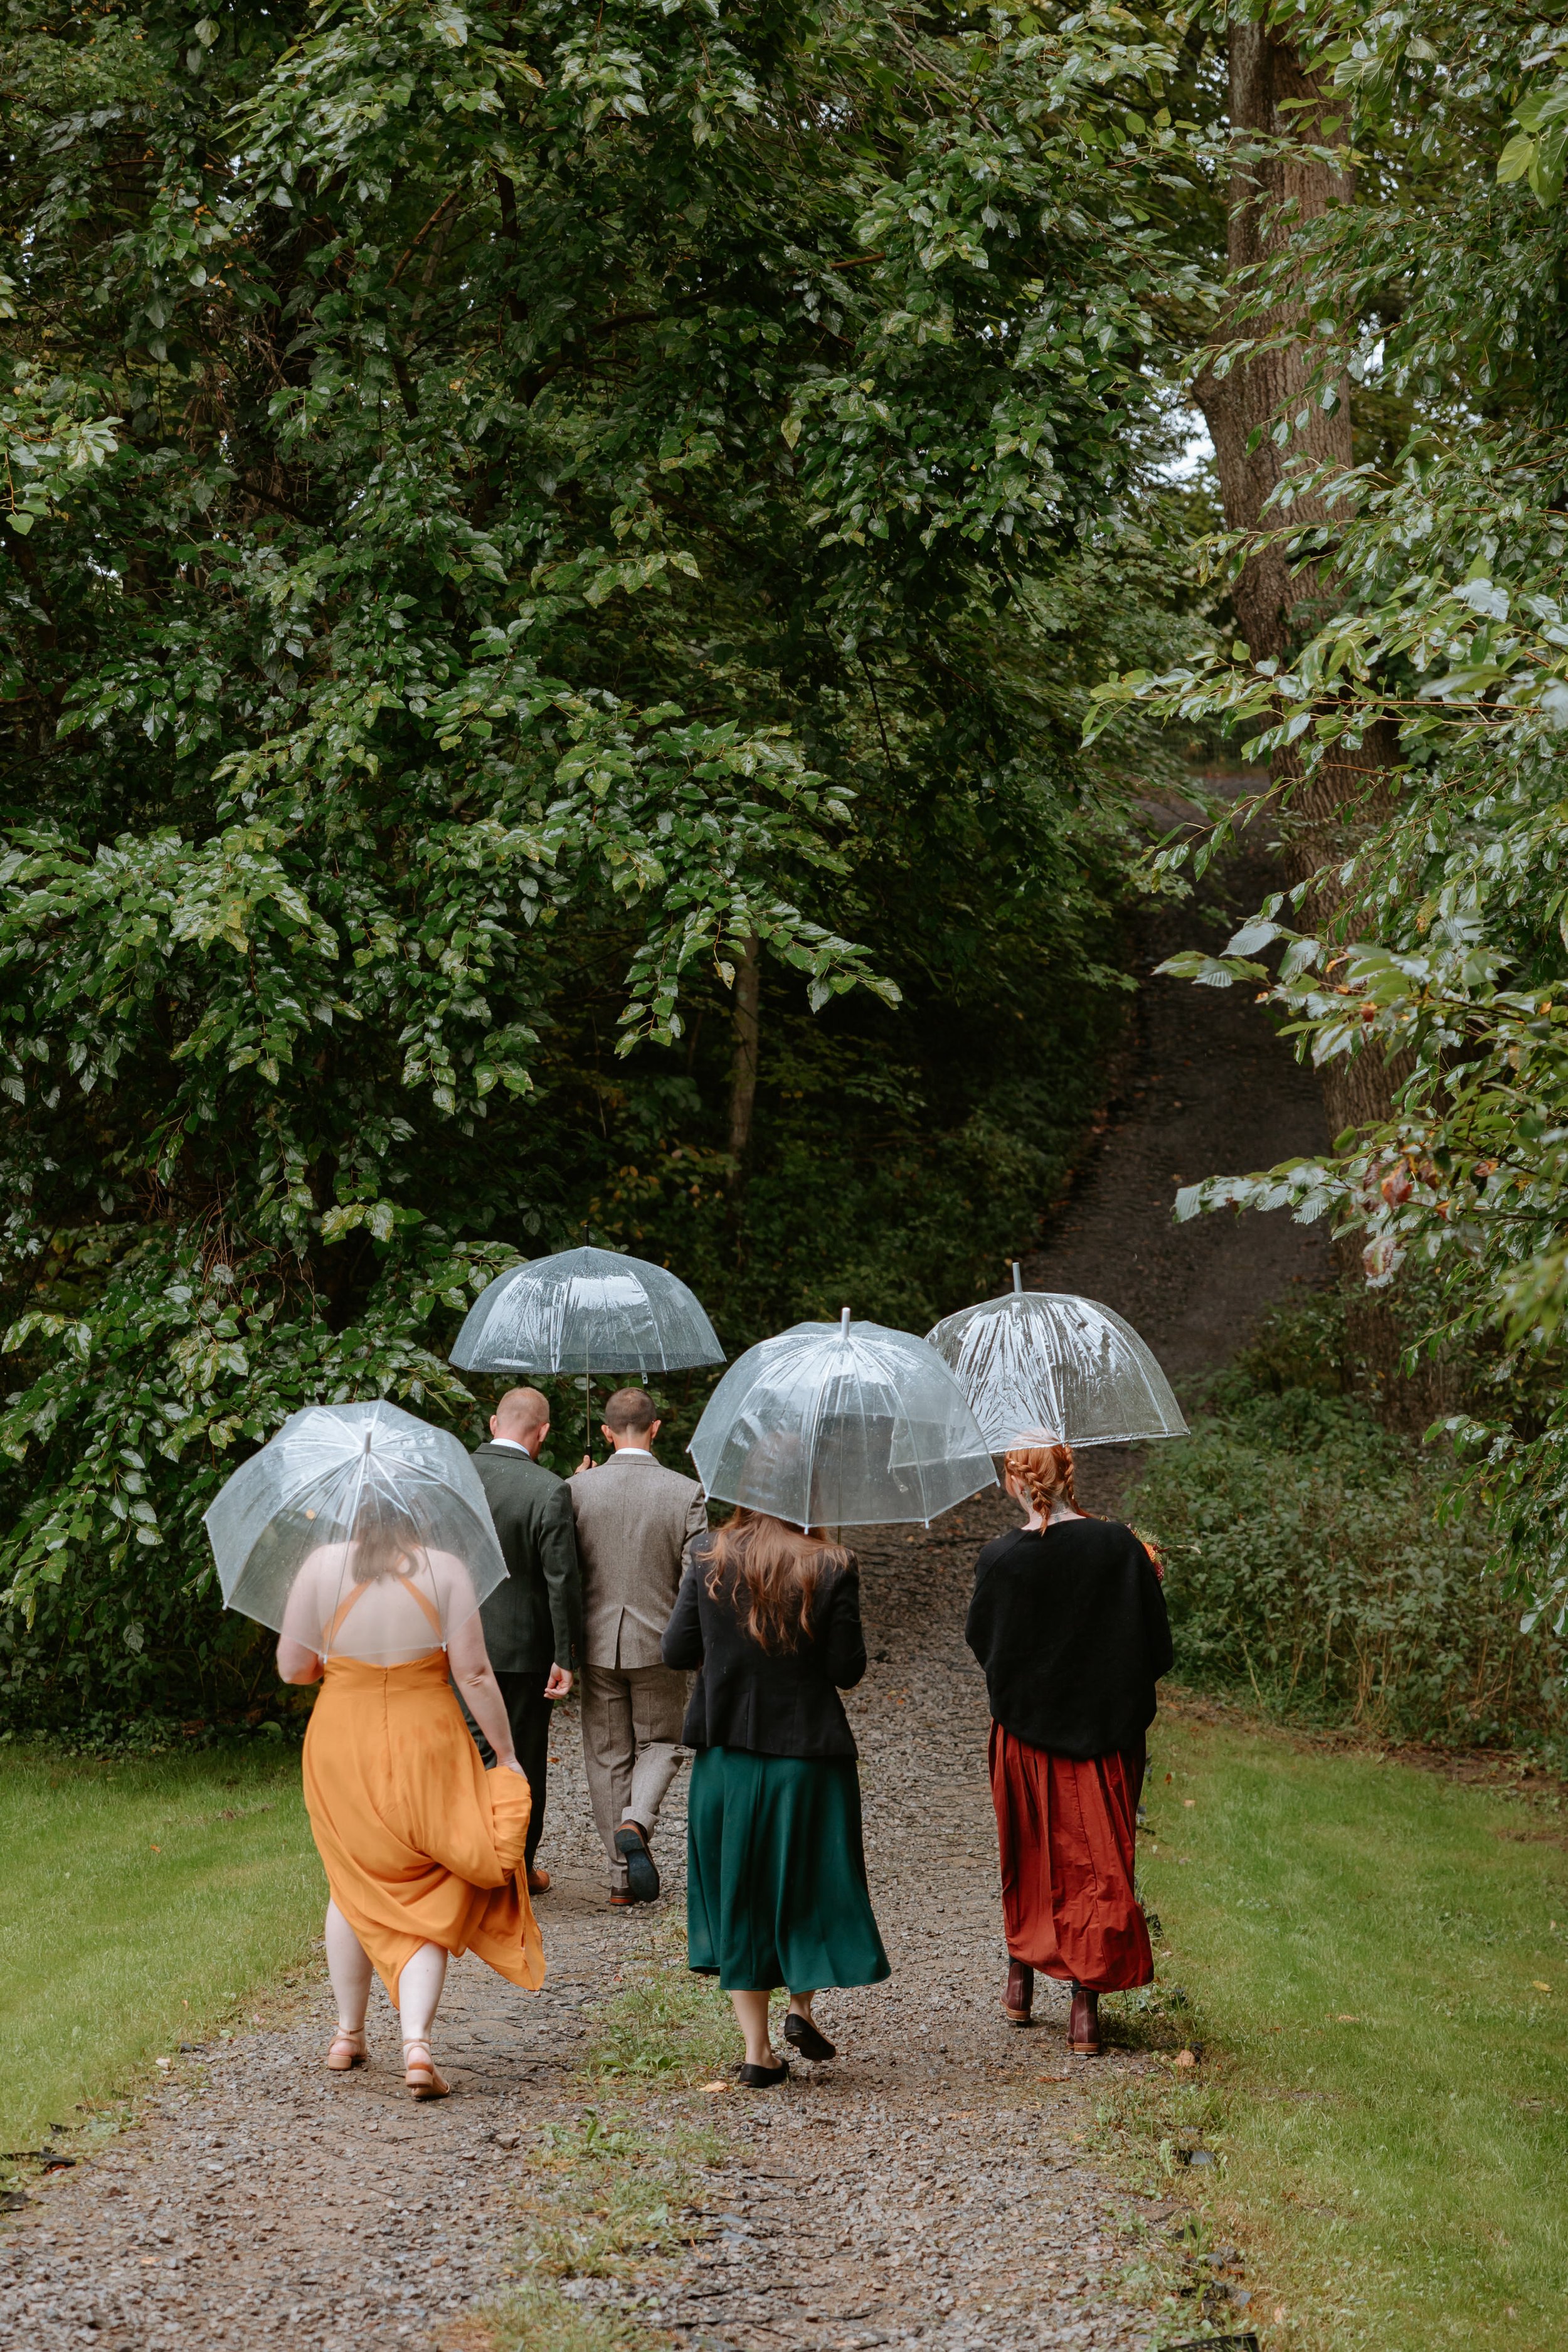 A group of people walking down a path with umbrellas.